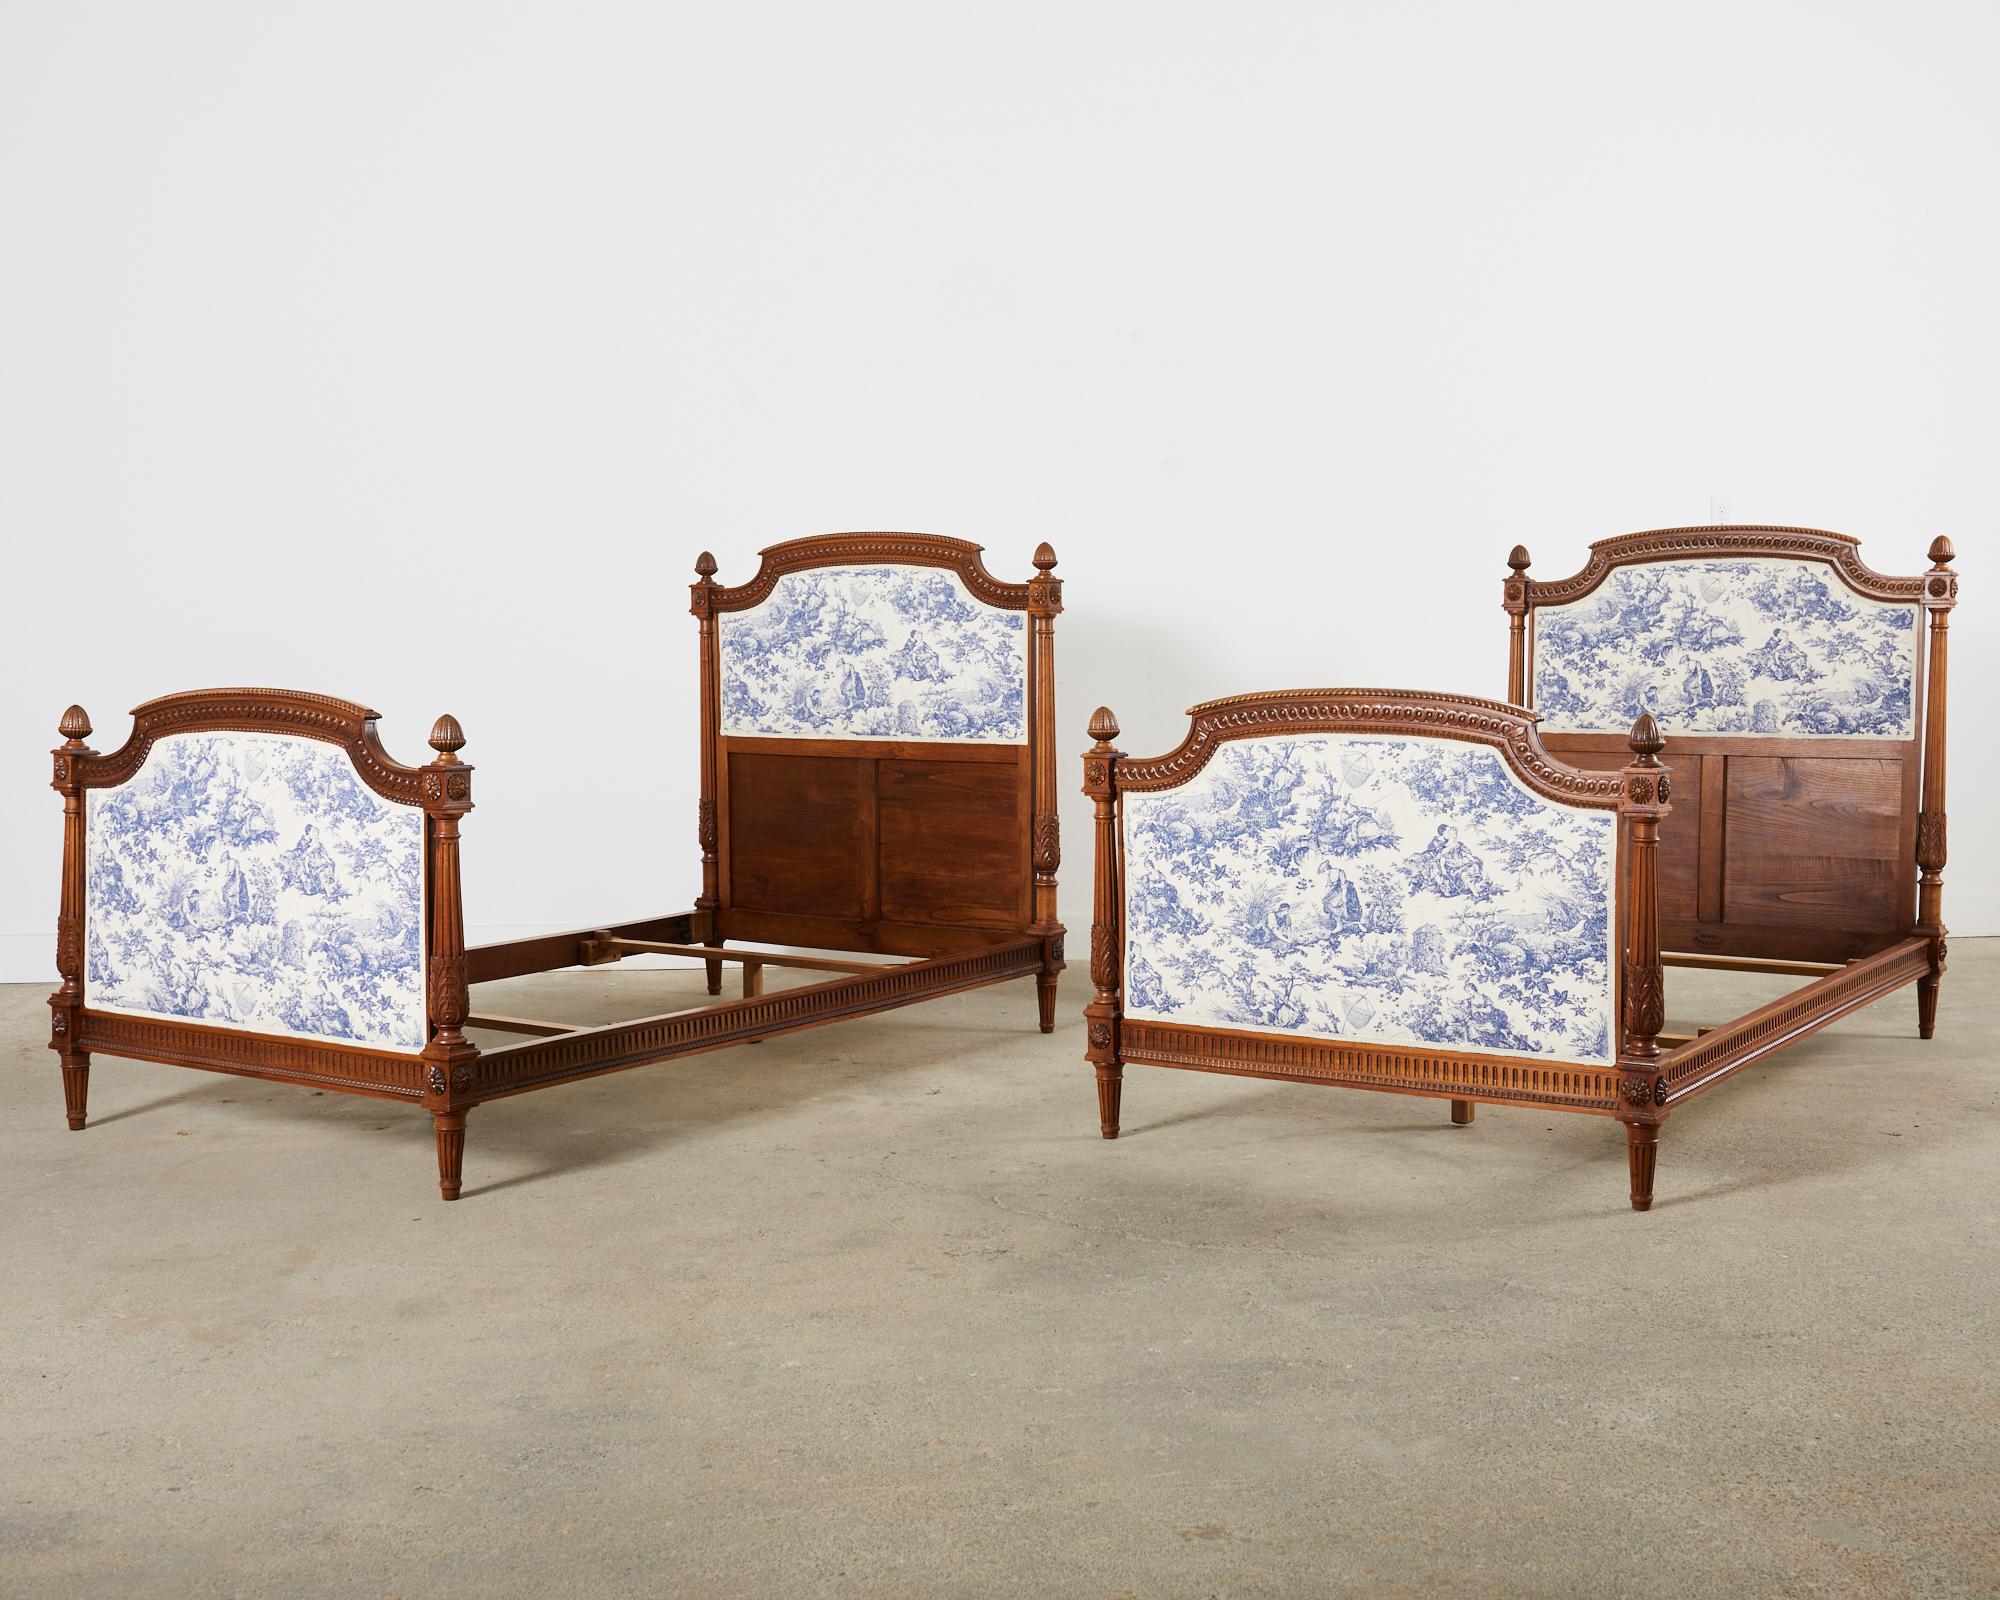 Remarkable pair of French walnut hand-carved beds featuring blue and white toile upholstery. Crafted in the grand neoclassical Louis XVI taste by Bardie in the Bordeaux region of France with makers branding stamp. The headboard and footboard have a